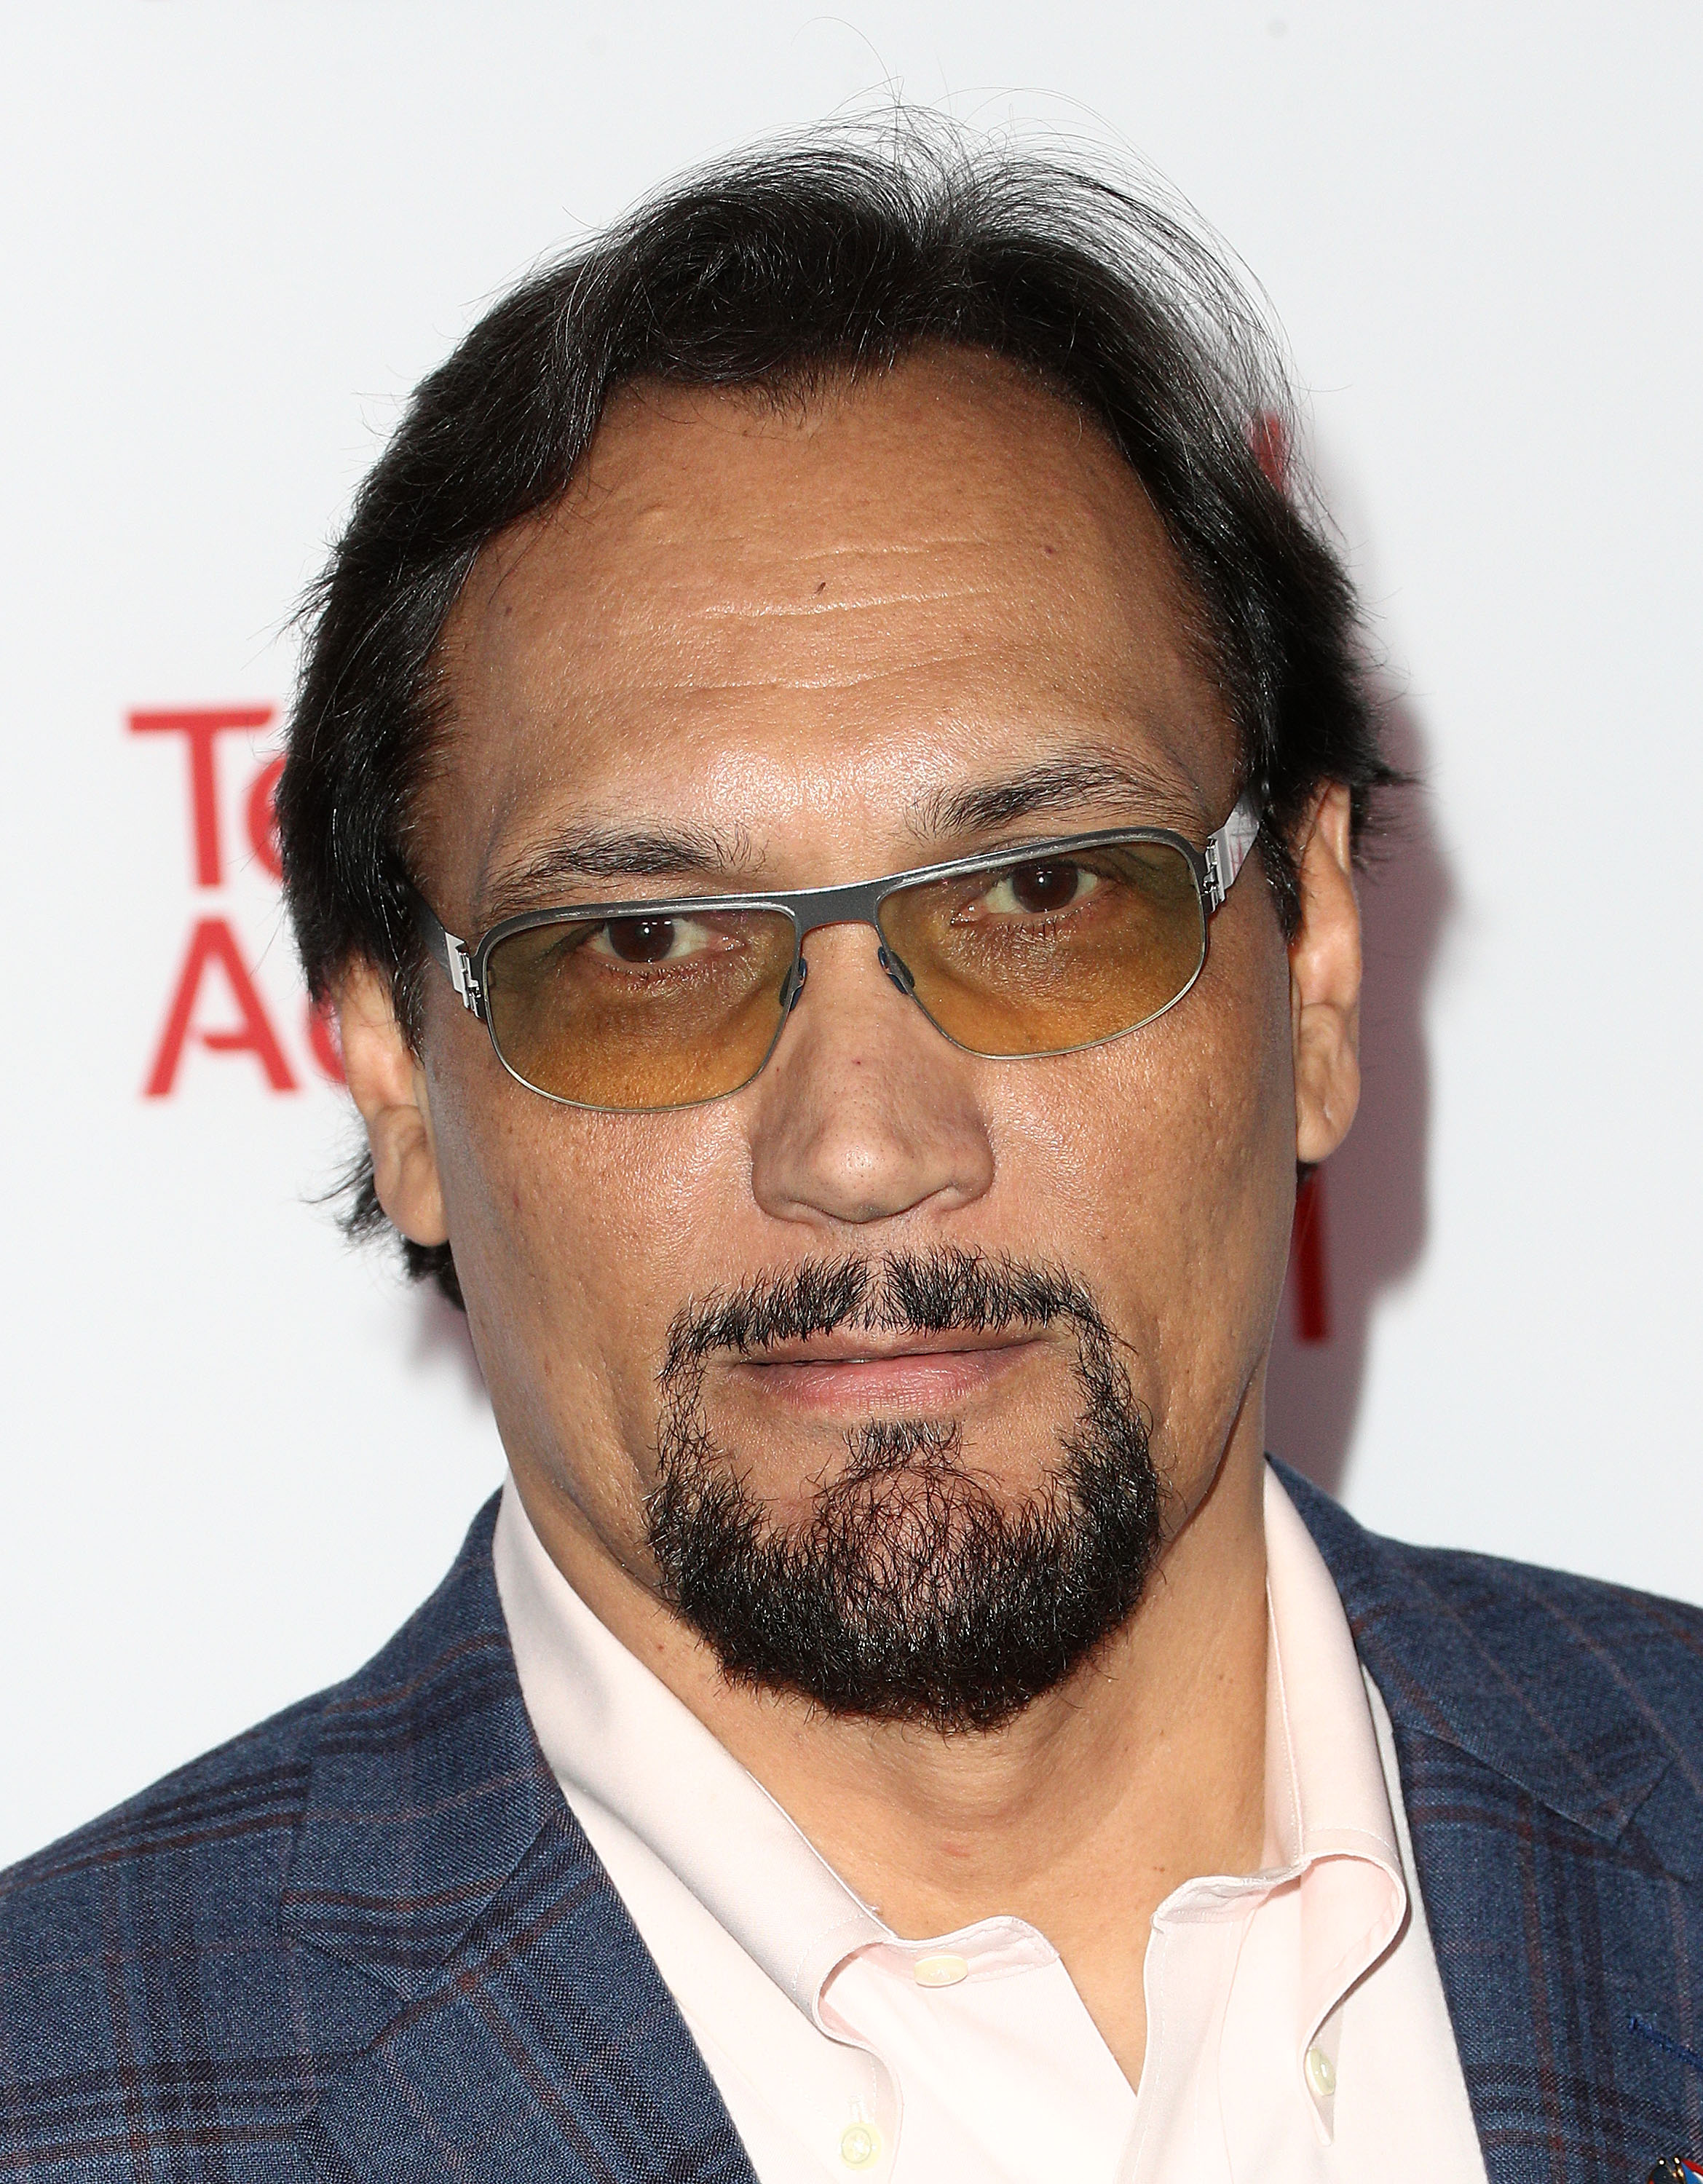 Jimmy Smits at the Television Academy's 24th Hall of Fame Ceremony at the Saban Media Center on November 15, 2017, in North Hollywood, California. | Source: Getty Images